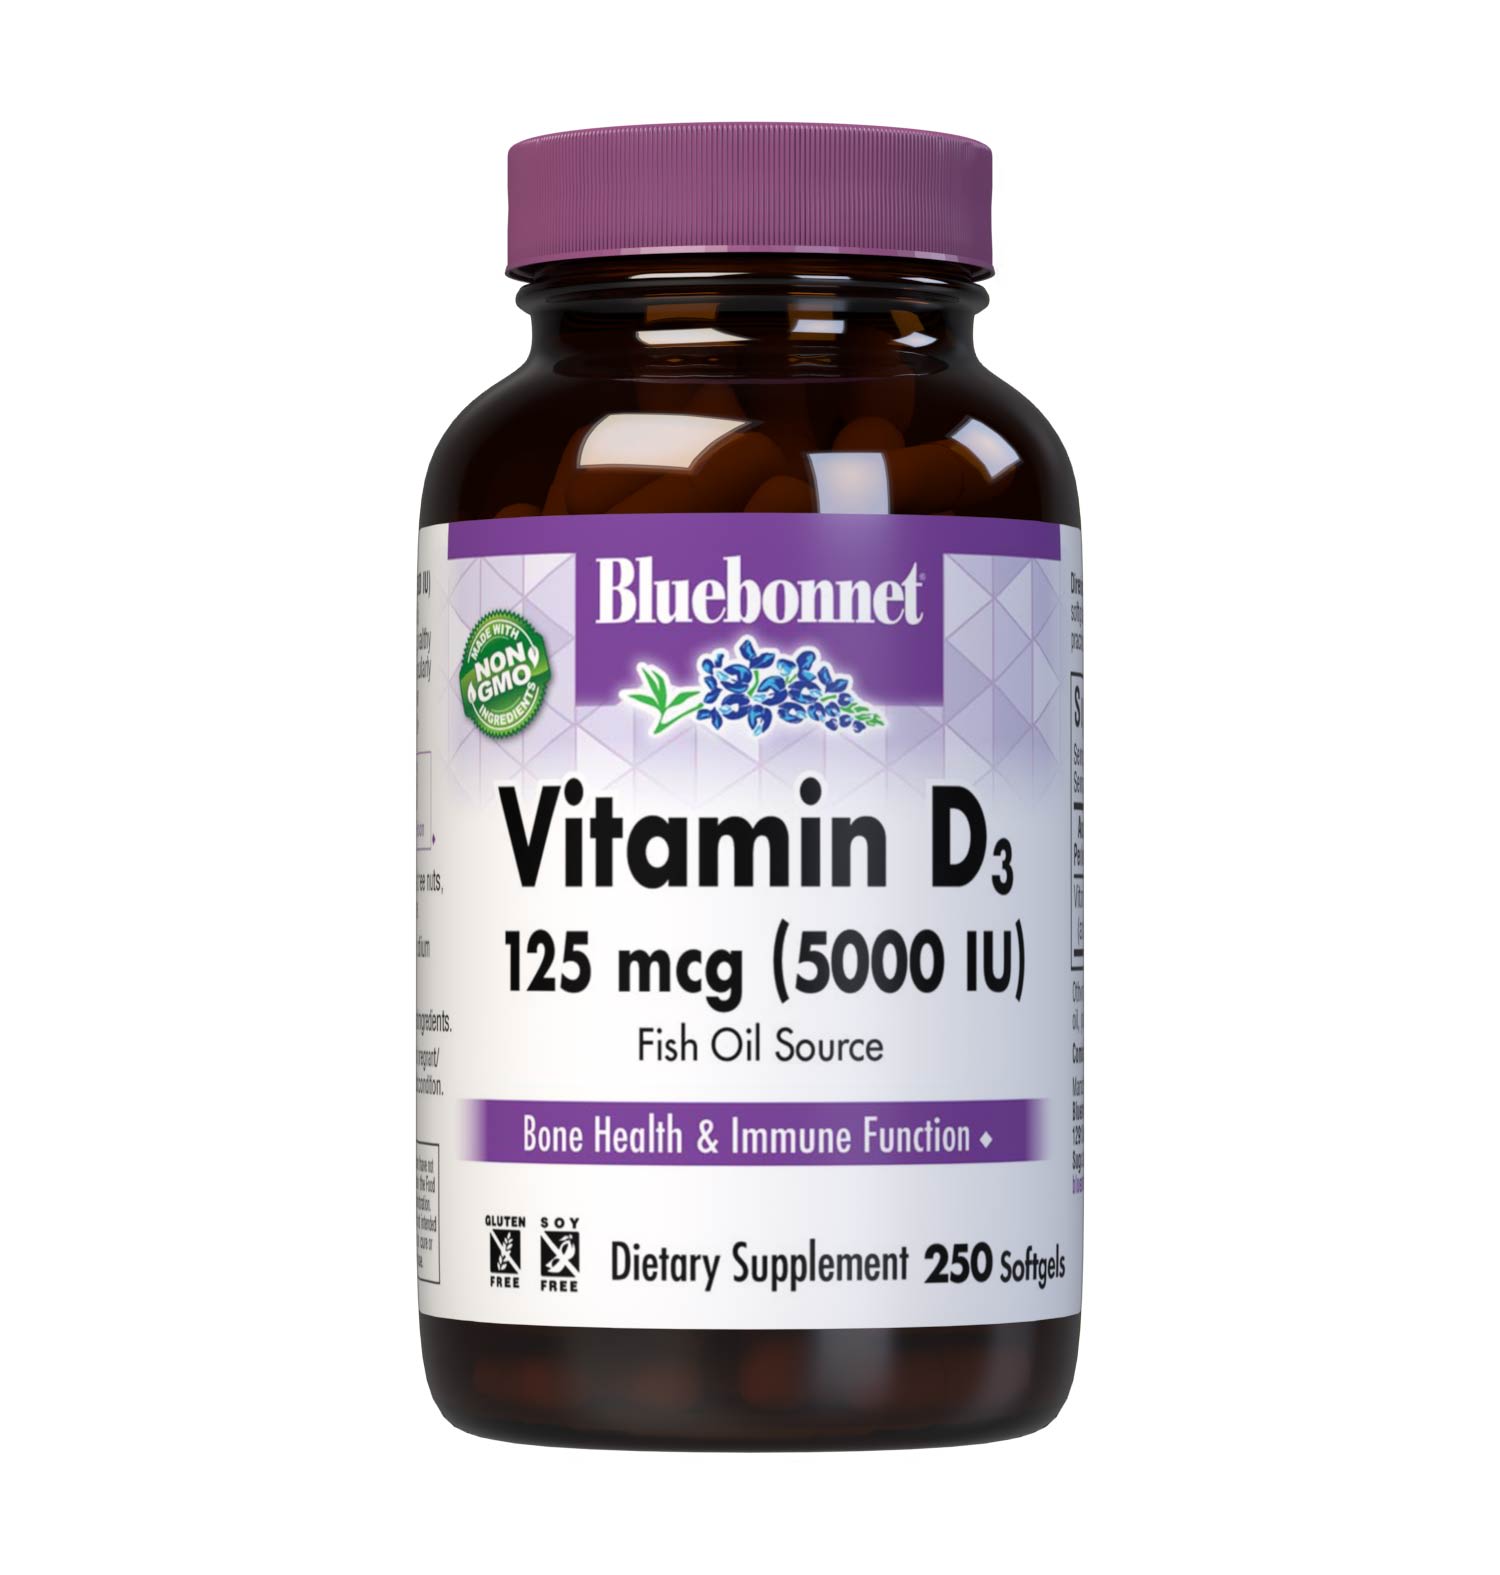 Bluebonnet’s Vitamin D3 125 mcg (5000 IU) 250 Softgels are formulated with vitamin D3 (cholecalciferol) that supports strong healthy bones and immune function from molecularly distilled, deep sea, cold water, fish liver oil in a base of non-GMO safflower oil. #size_250 count